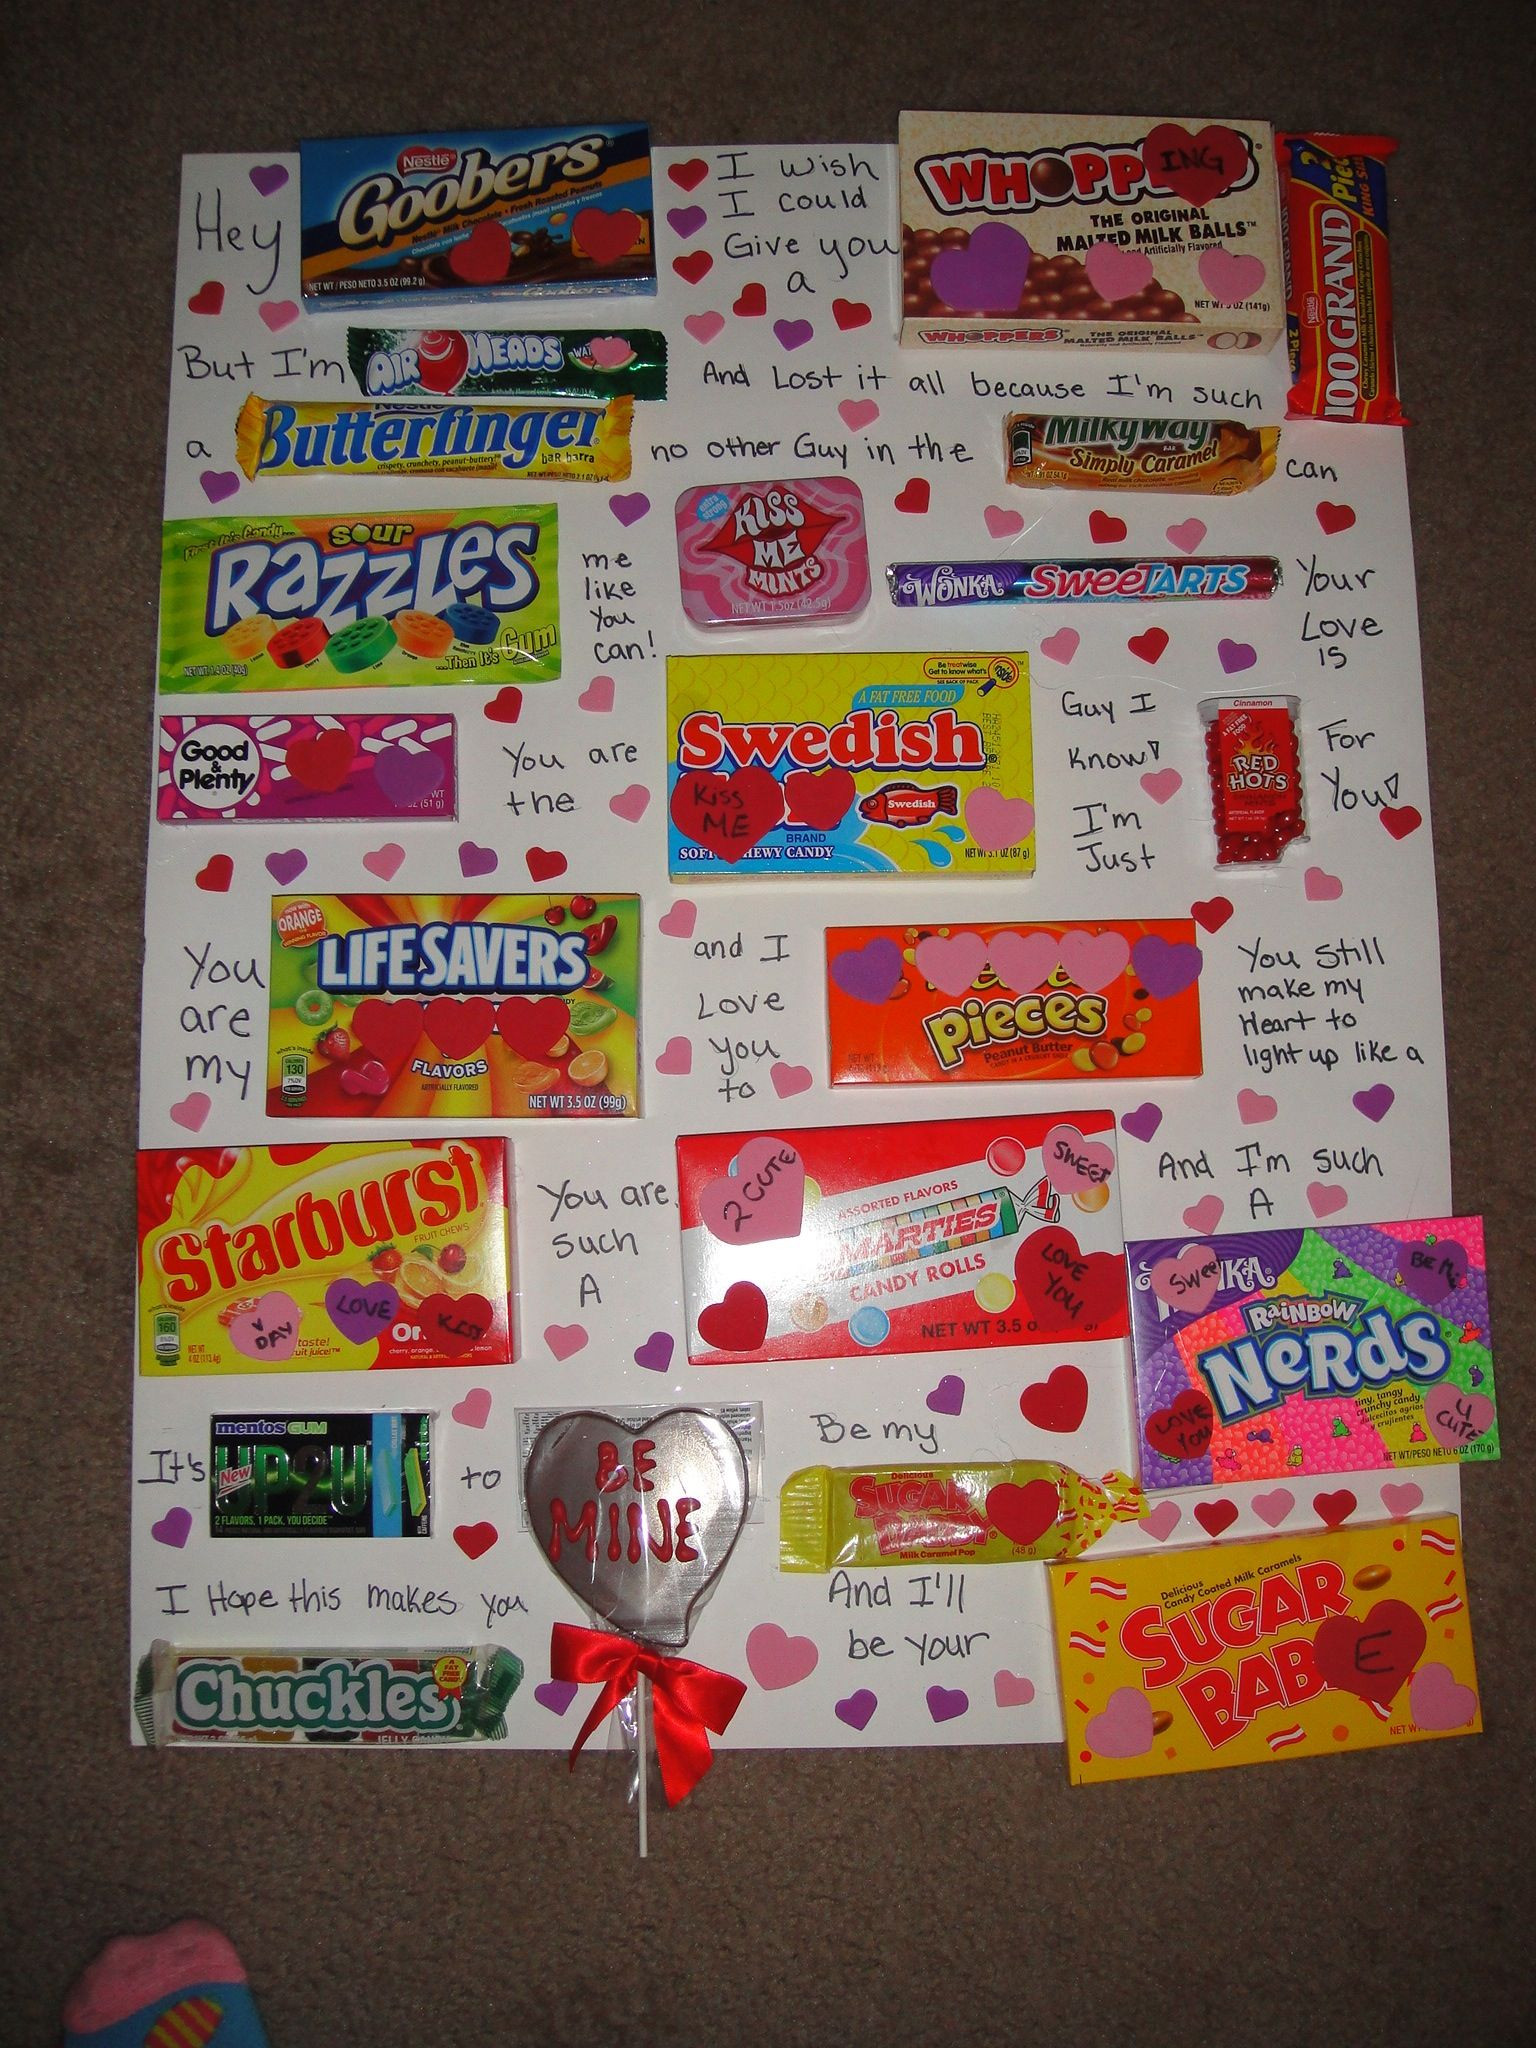 Valentines Day Candy Card
 Pin by reagan hinson on Awesome